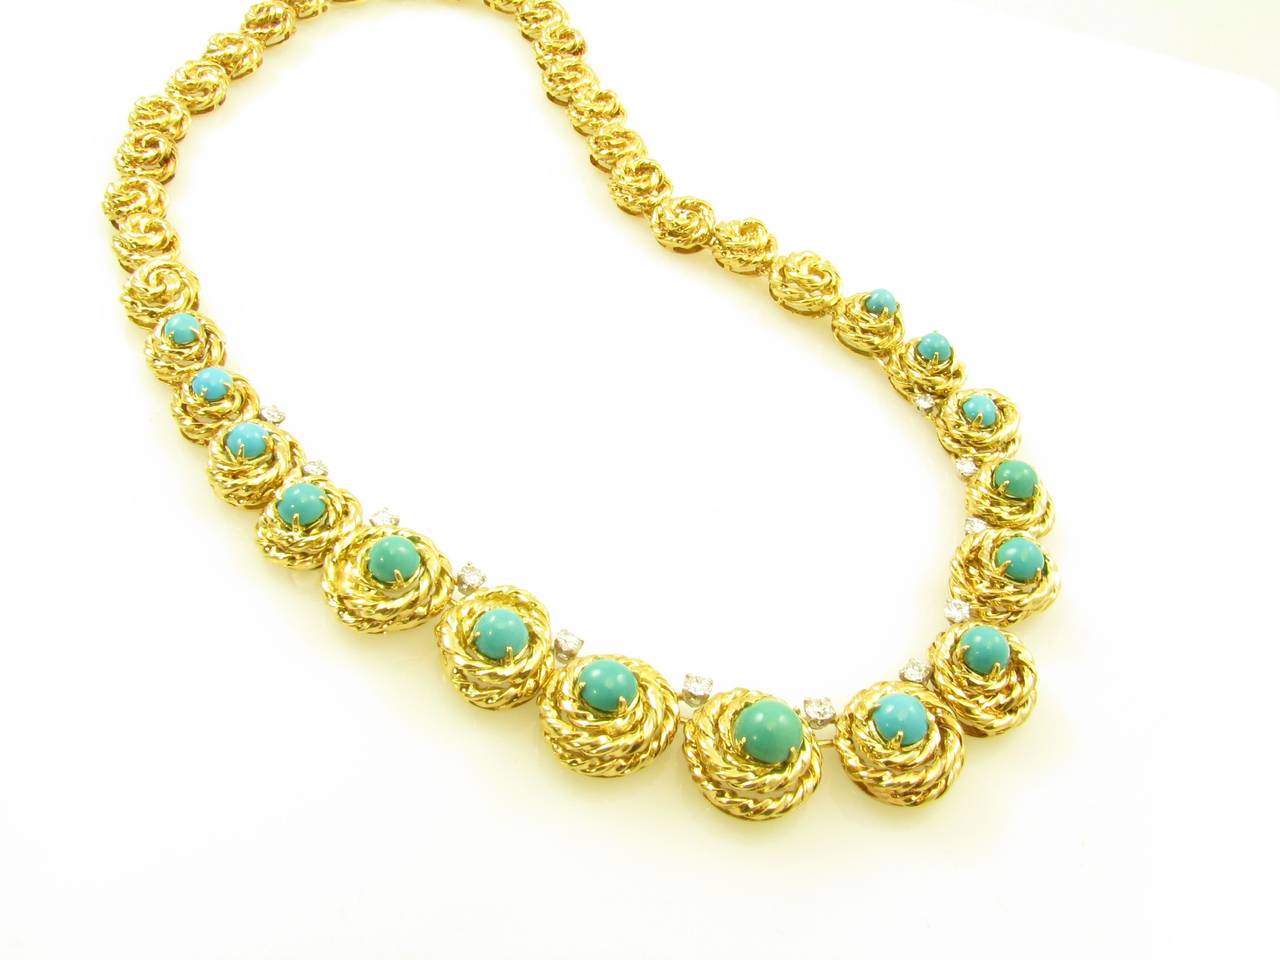 An 18 karat yellow gold, turquoise and diamond necklace.  Van Cleef and Arpels.  French.  Circa 1960.  The necklace is designed as continuous twisted gold knots set with a total of (15) fifteen cabochon turquoise and (12) twelve circular cut